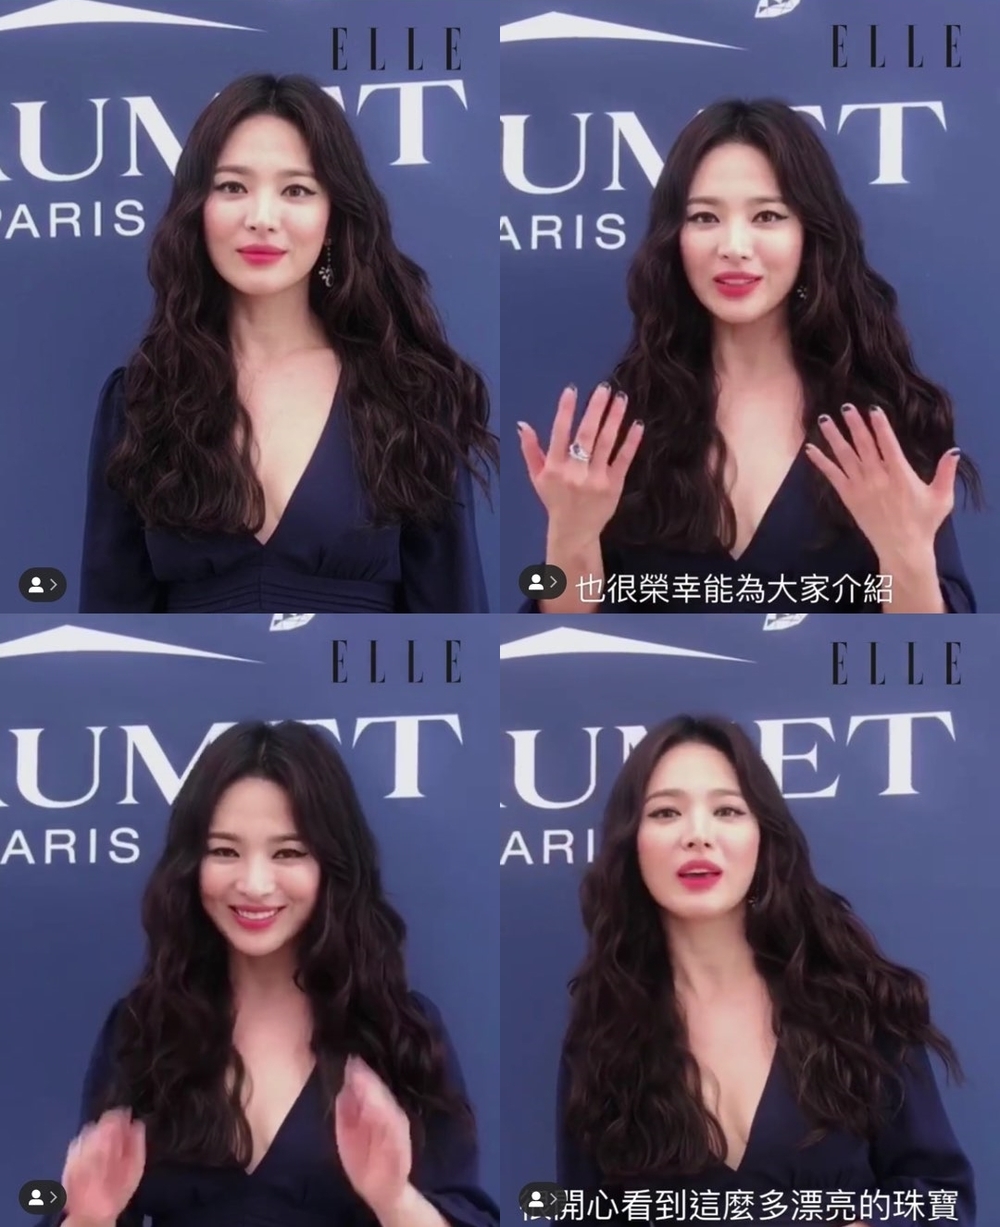 Actor Song Hye-kyo has been caught up in the recent situation.On the morning of July 12, an official Instagram of Elle Hong Kong (ELLE HONGKONG) posted a video of Song Hye-kyos interview.The video shows Song Hye-kyo, who talks with her long hair hanging down and looking more beautiful. Song Hye-kyo said, Hello, El Hong Kong readers. Song Hye-kyo.Im in Monaco with Shome, and Im so happy to spend time with such a wonderful jewelery, and Im so honored to be able to introduce myself to you.Have a good time with Shome today, he said.Song Hye-kyo attended a brand Event and gathered topics. On the 5th, he visited China to attend cosmetics brand Events that are also working as models.The Chinese Event was a hot topic because Song Hye-kyo was the first official to attend after the divorce.Song Hye-kyo announced on June 27 that he was in the process of divorce with Actor Song Joong-ki through his agency. Song Hye-kyo said, I could not overcome the difference and I made this decision inevitably.Song Hye-kyo and Song Joong-ki married in October 2017, but they were broke up after a year and eight months.hwang hye-jin